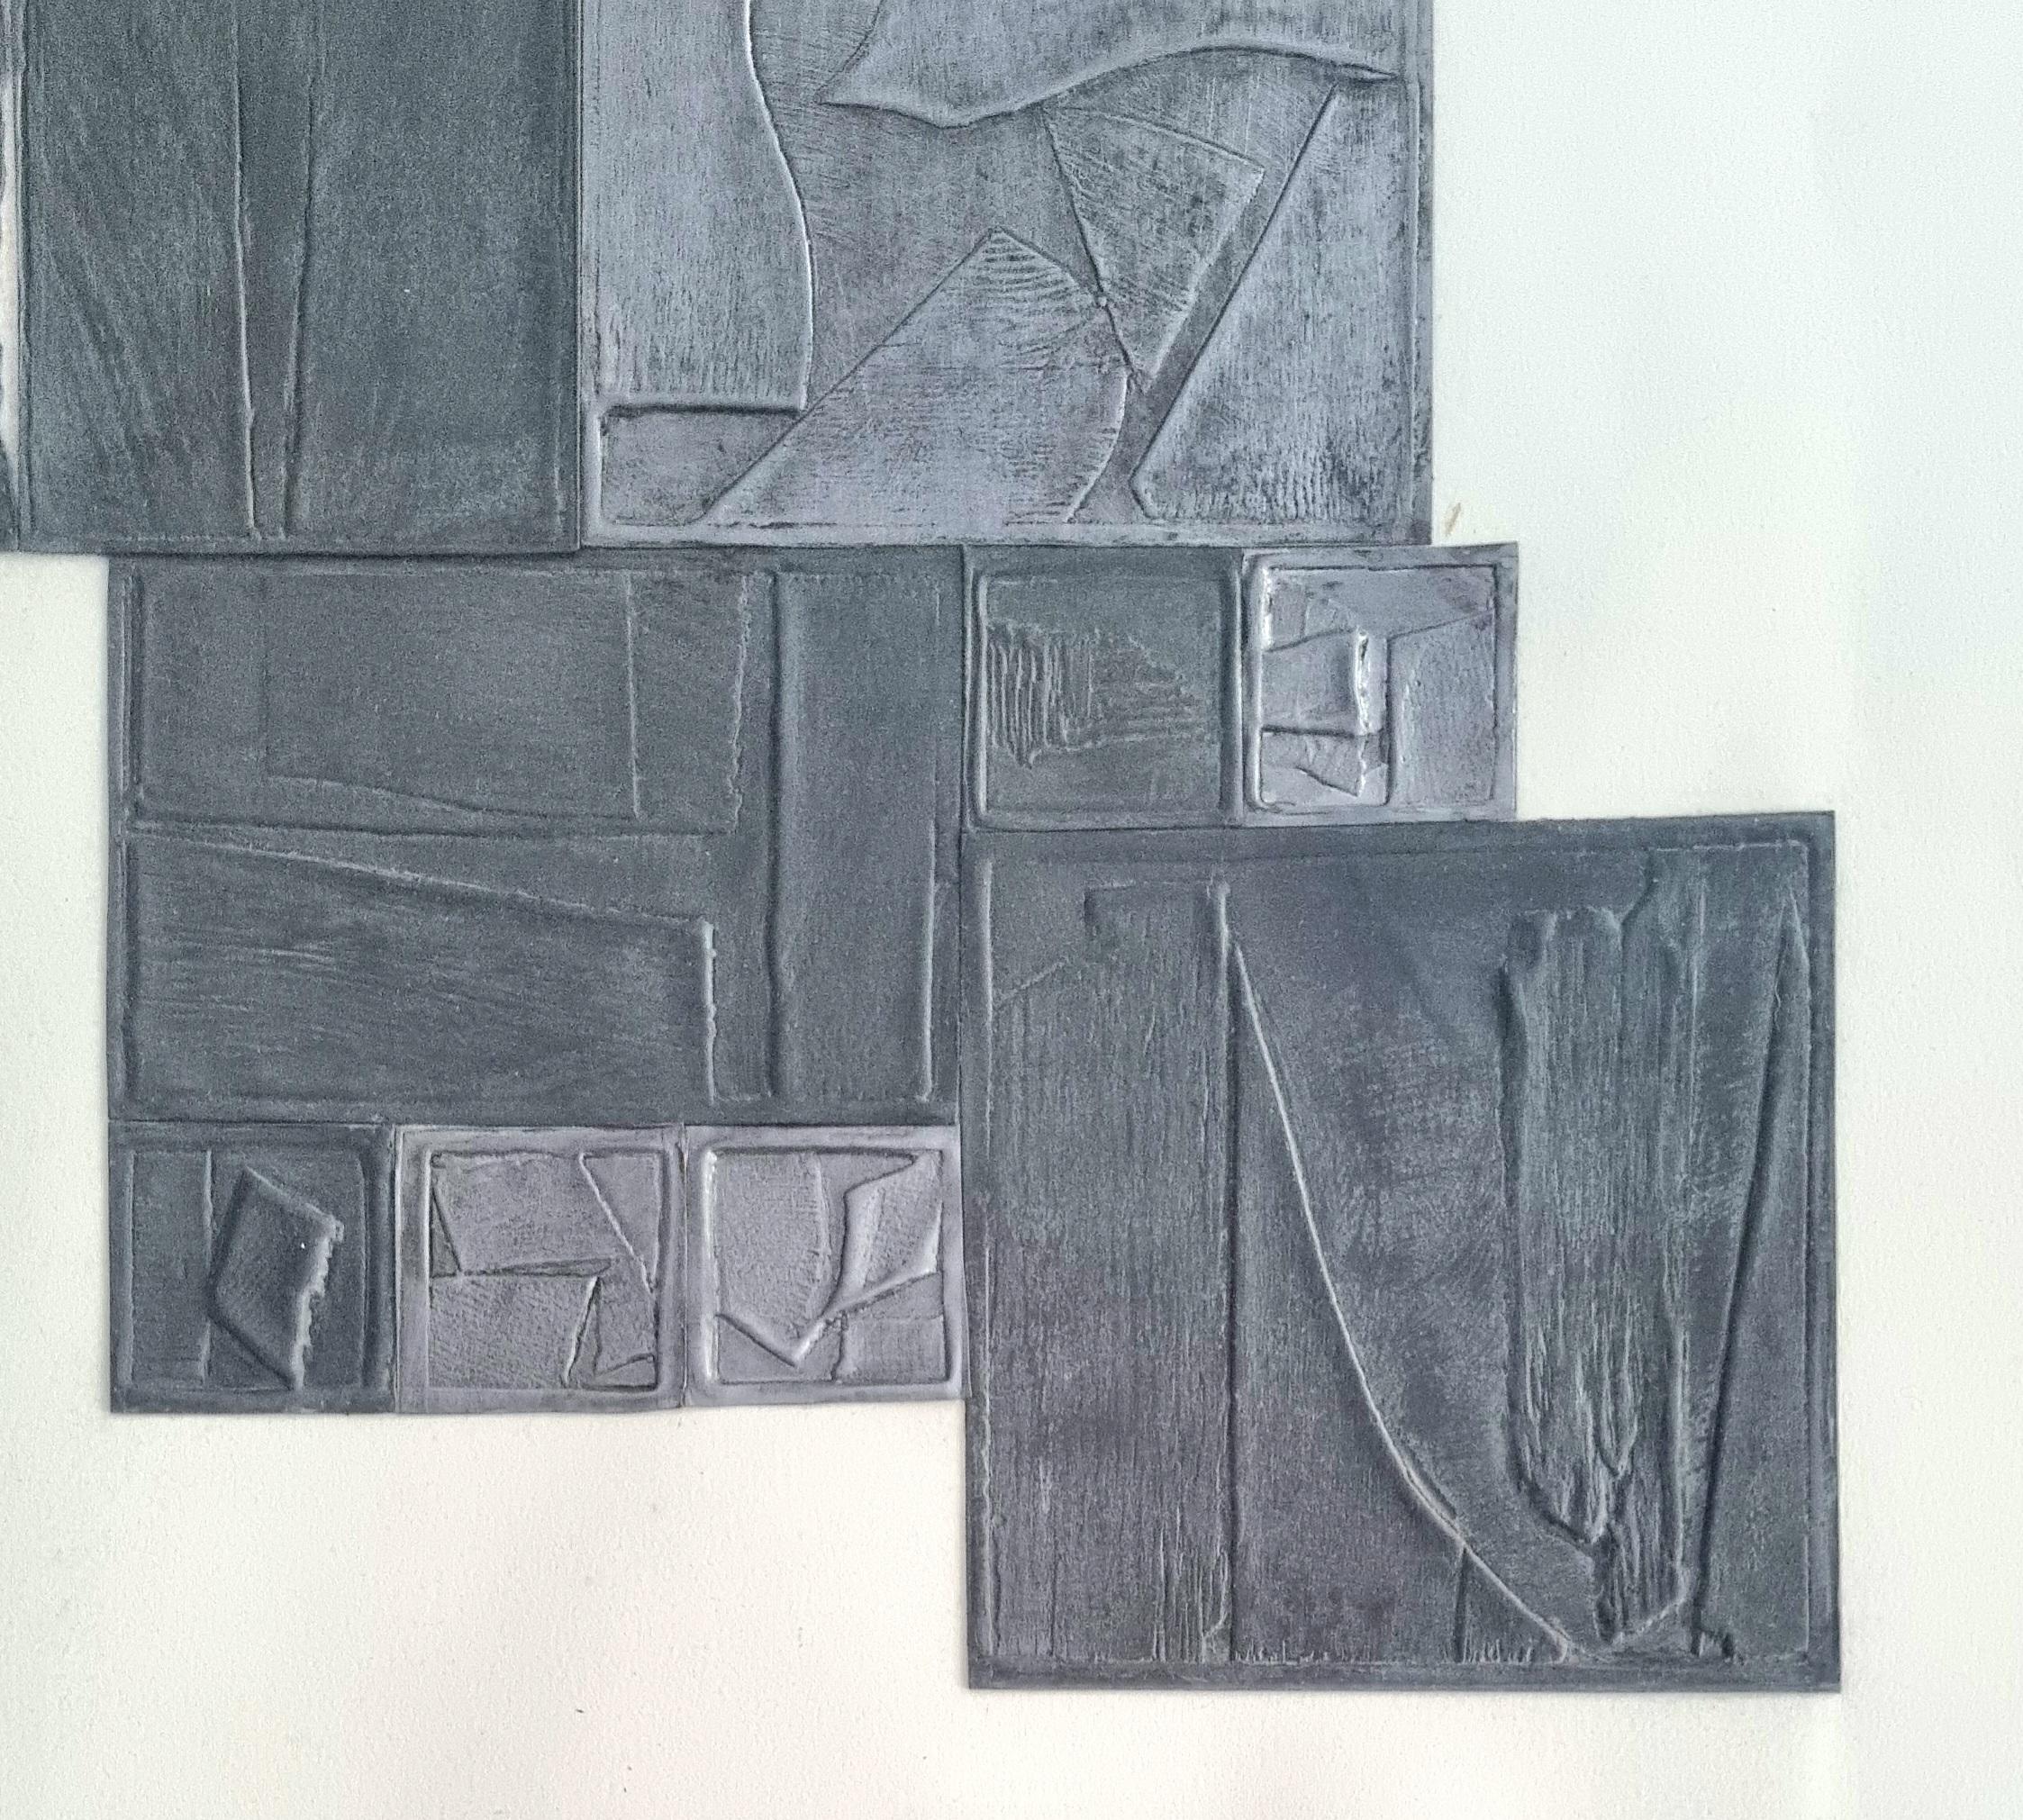 LOUISE NEVELSON - Night Tree 1970, Lead Intaglio Series 76 x 63.4 cm In Excellent Condition For Sale In Vigevano, PV